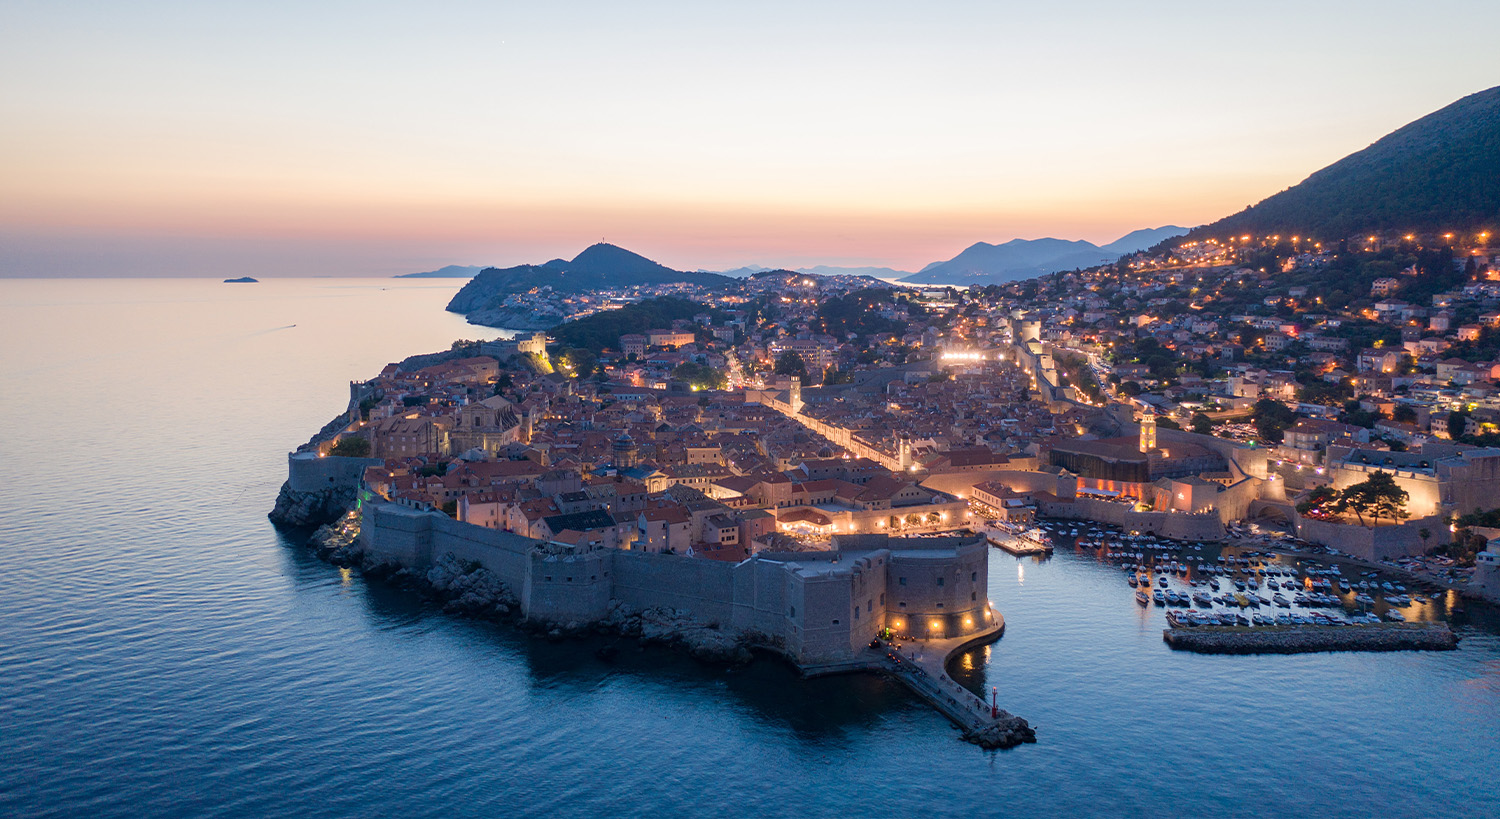 Dubrovnik old city during night